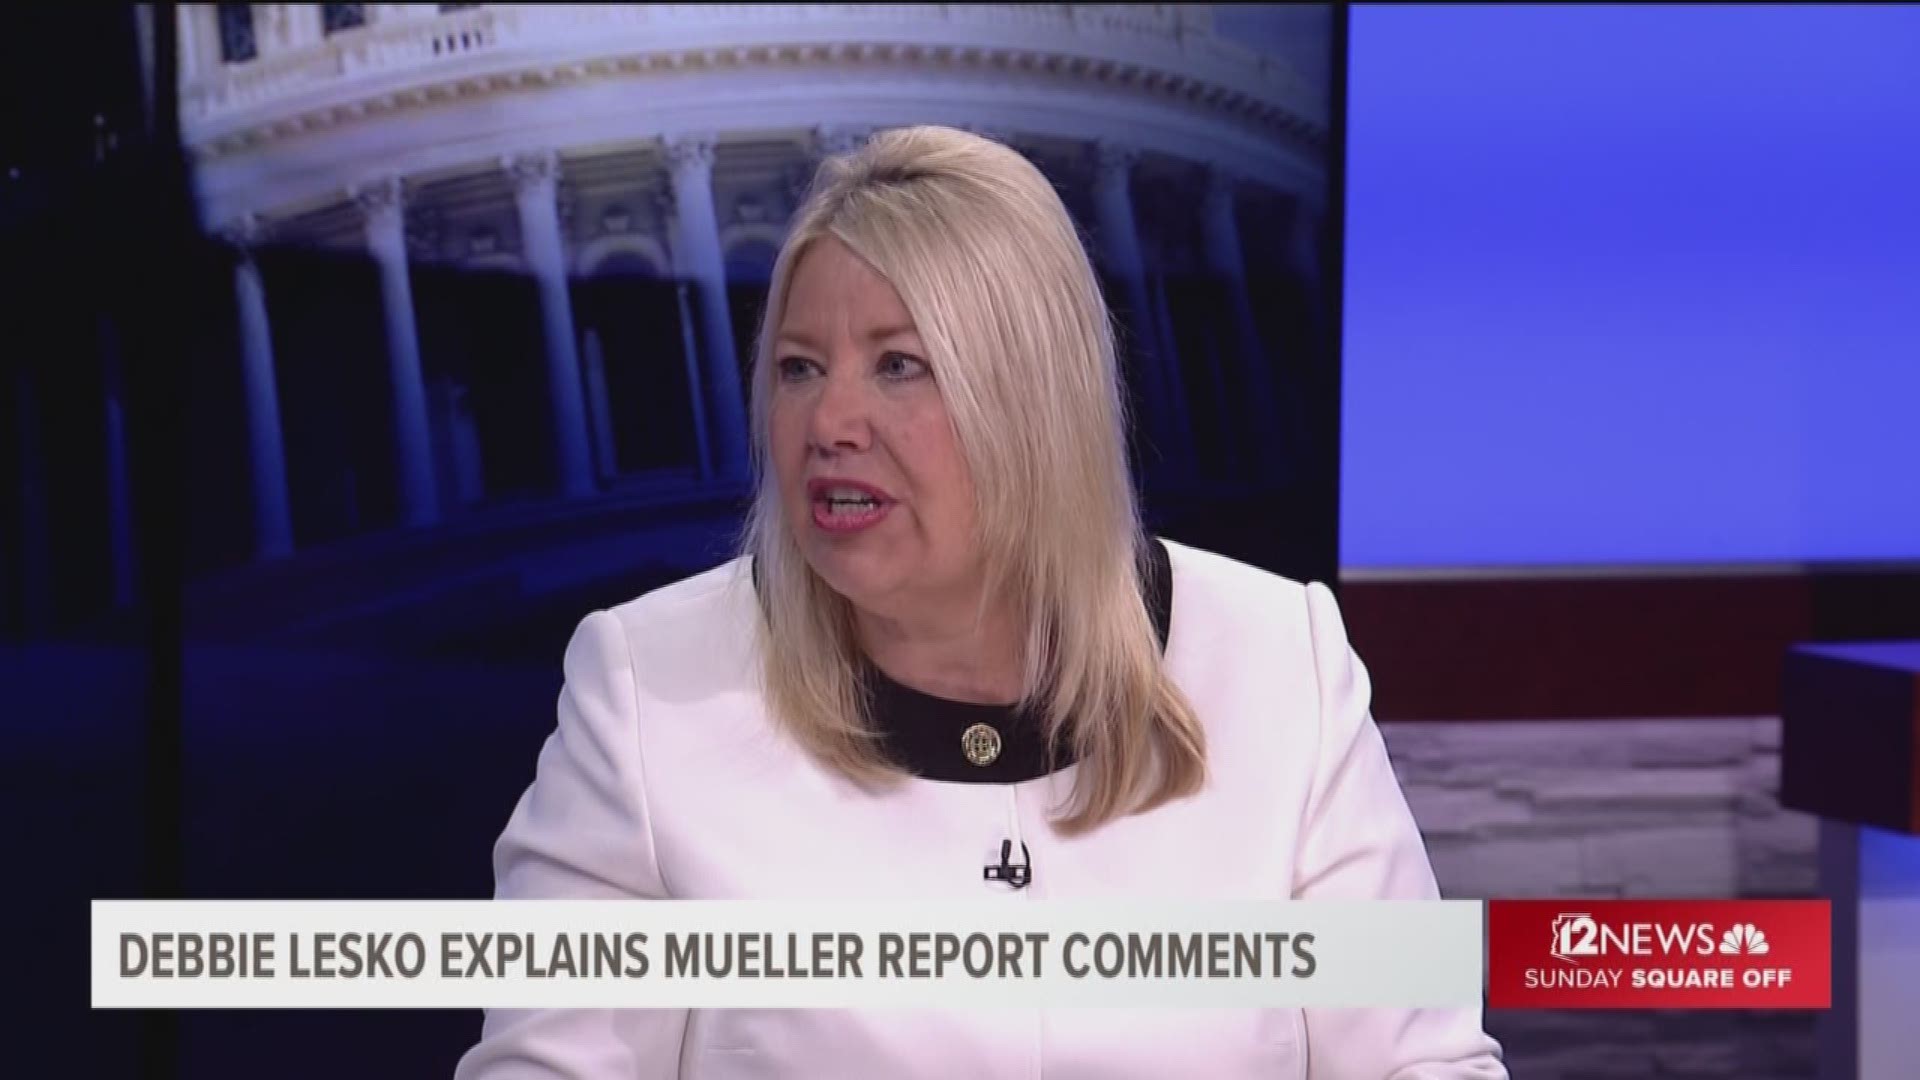 Debbie Lesko of Peoria told former Special Counsel Robert Mueller his was based on "regurgitated" news reports. So I read back to Lesko the witness interview in which the former White House counsel recounts the president's order to fire Mueller.